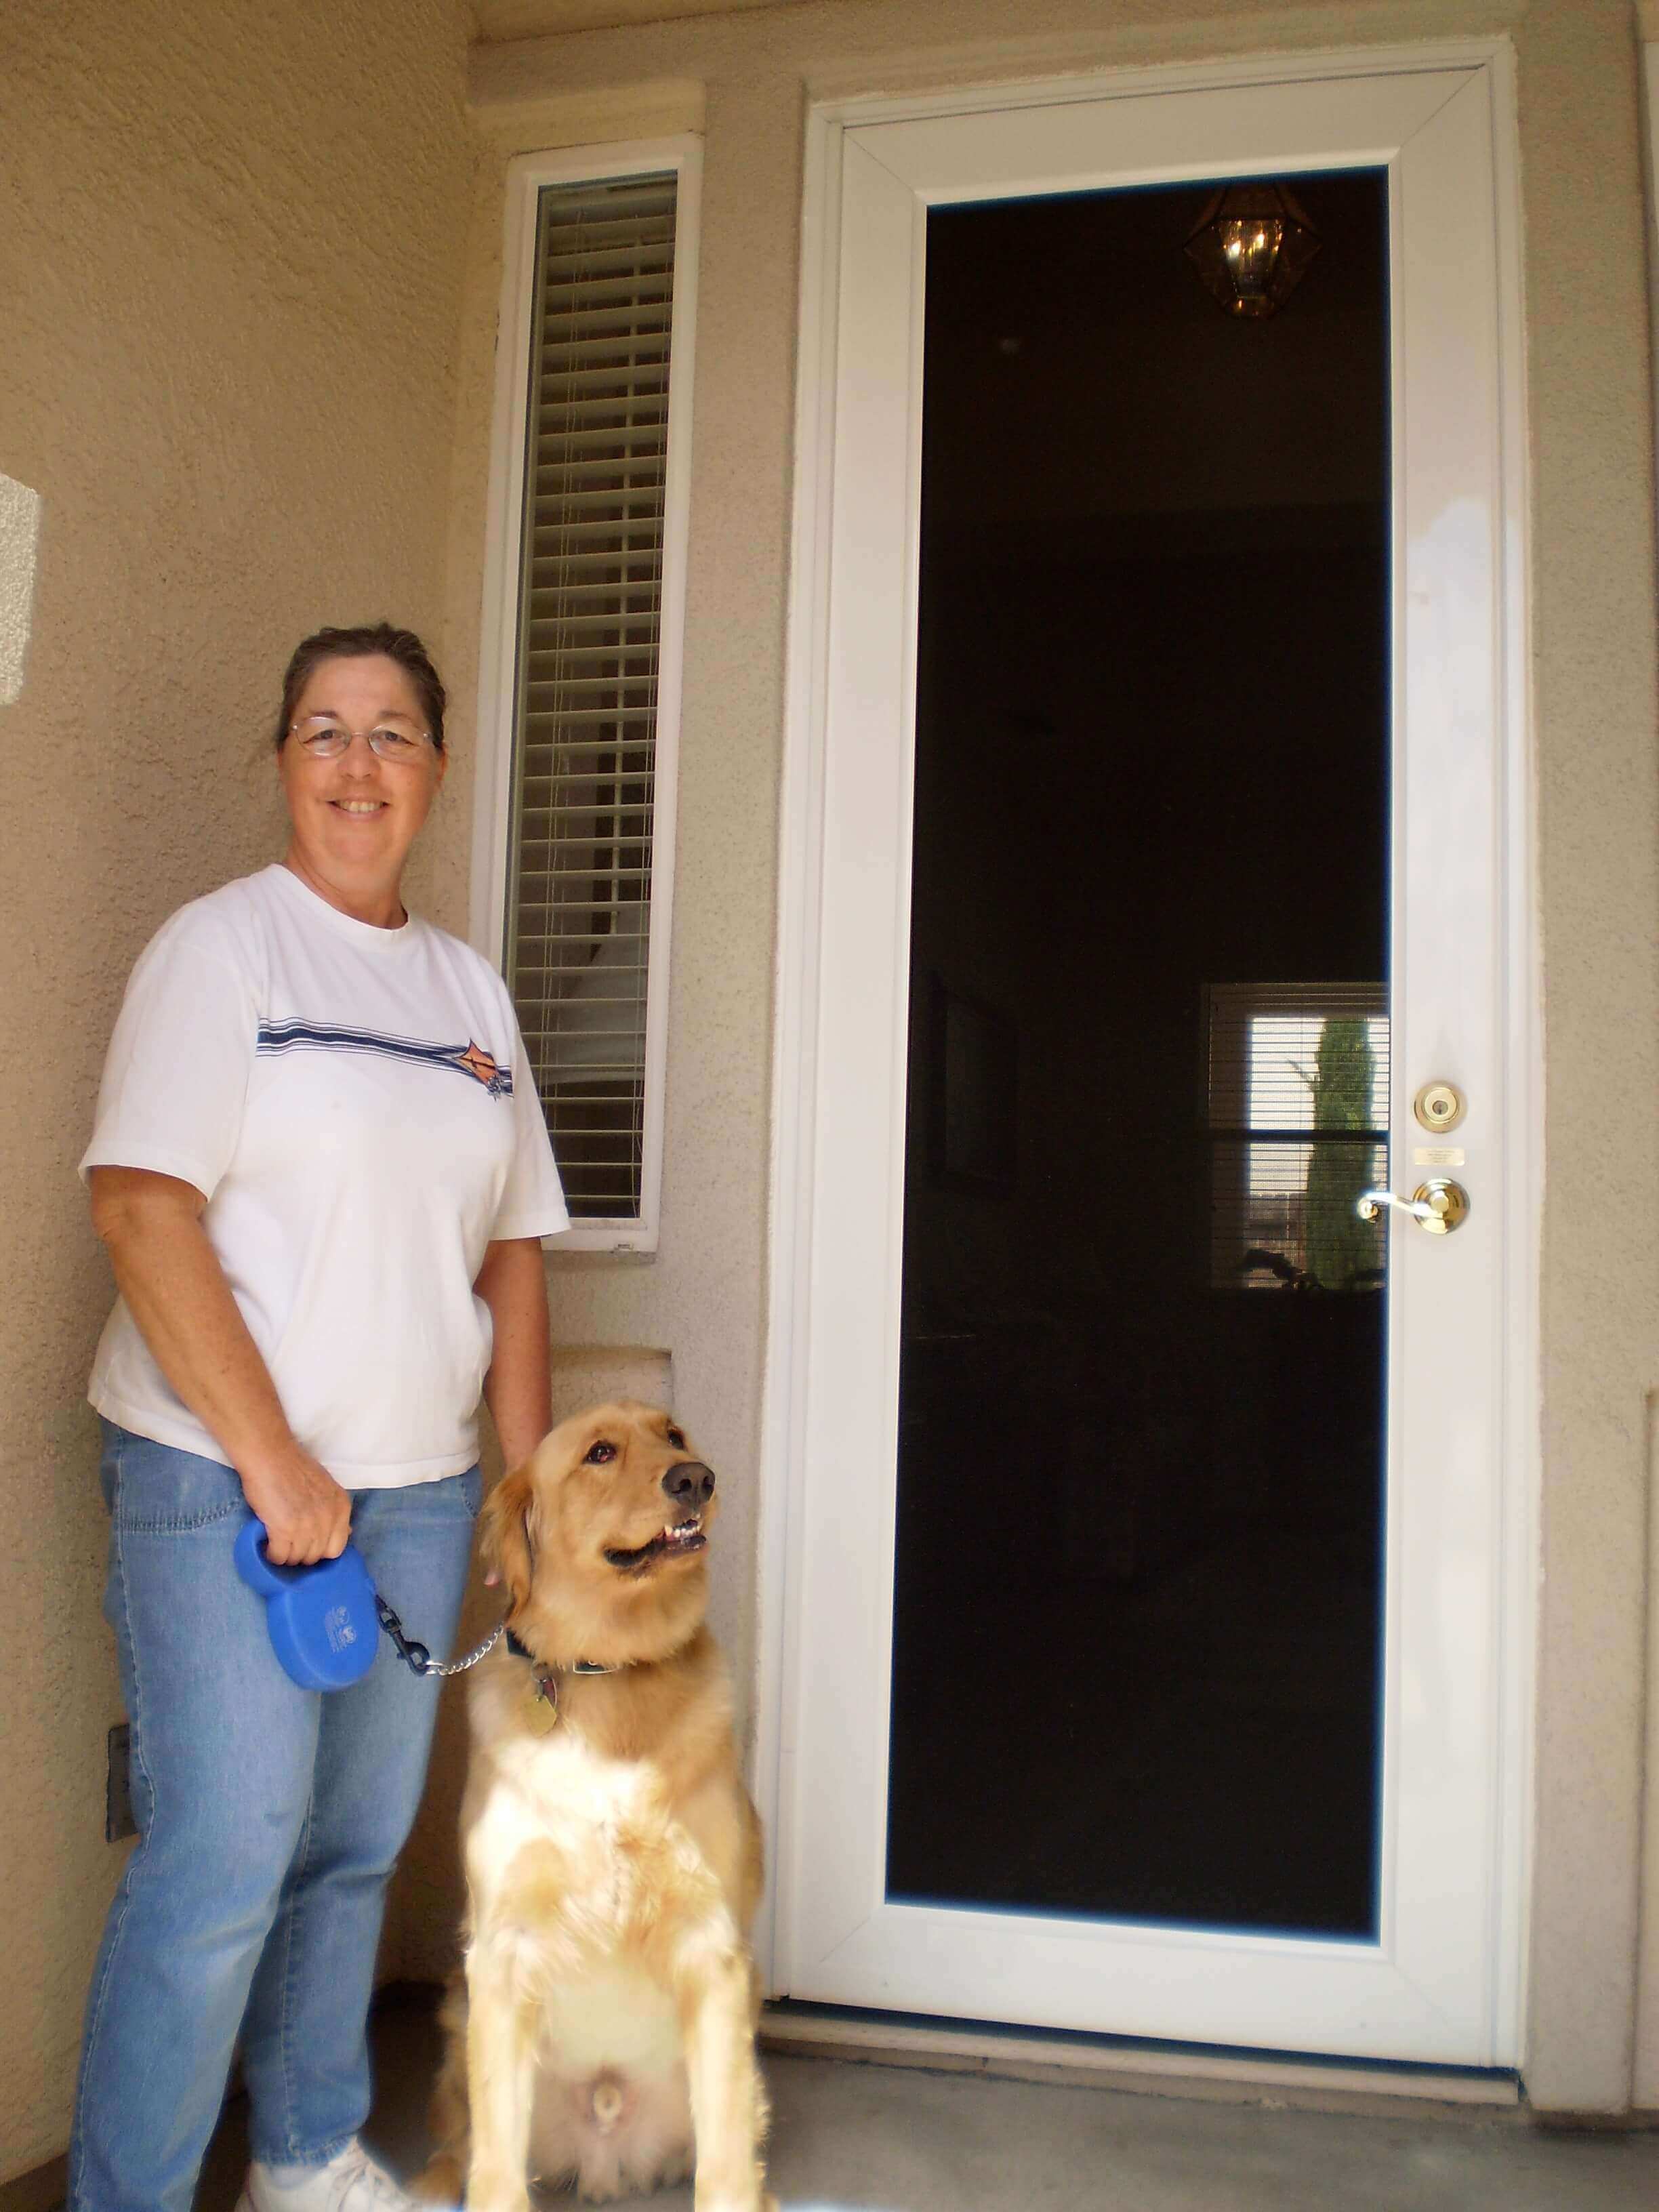 Keep Your Home Secure With Security Screen Doors and Window Screens